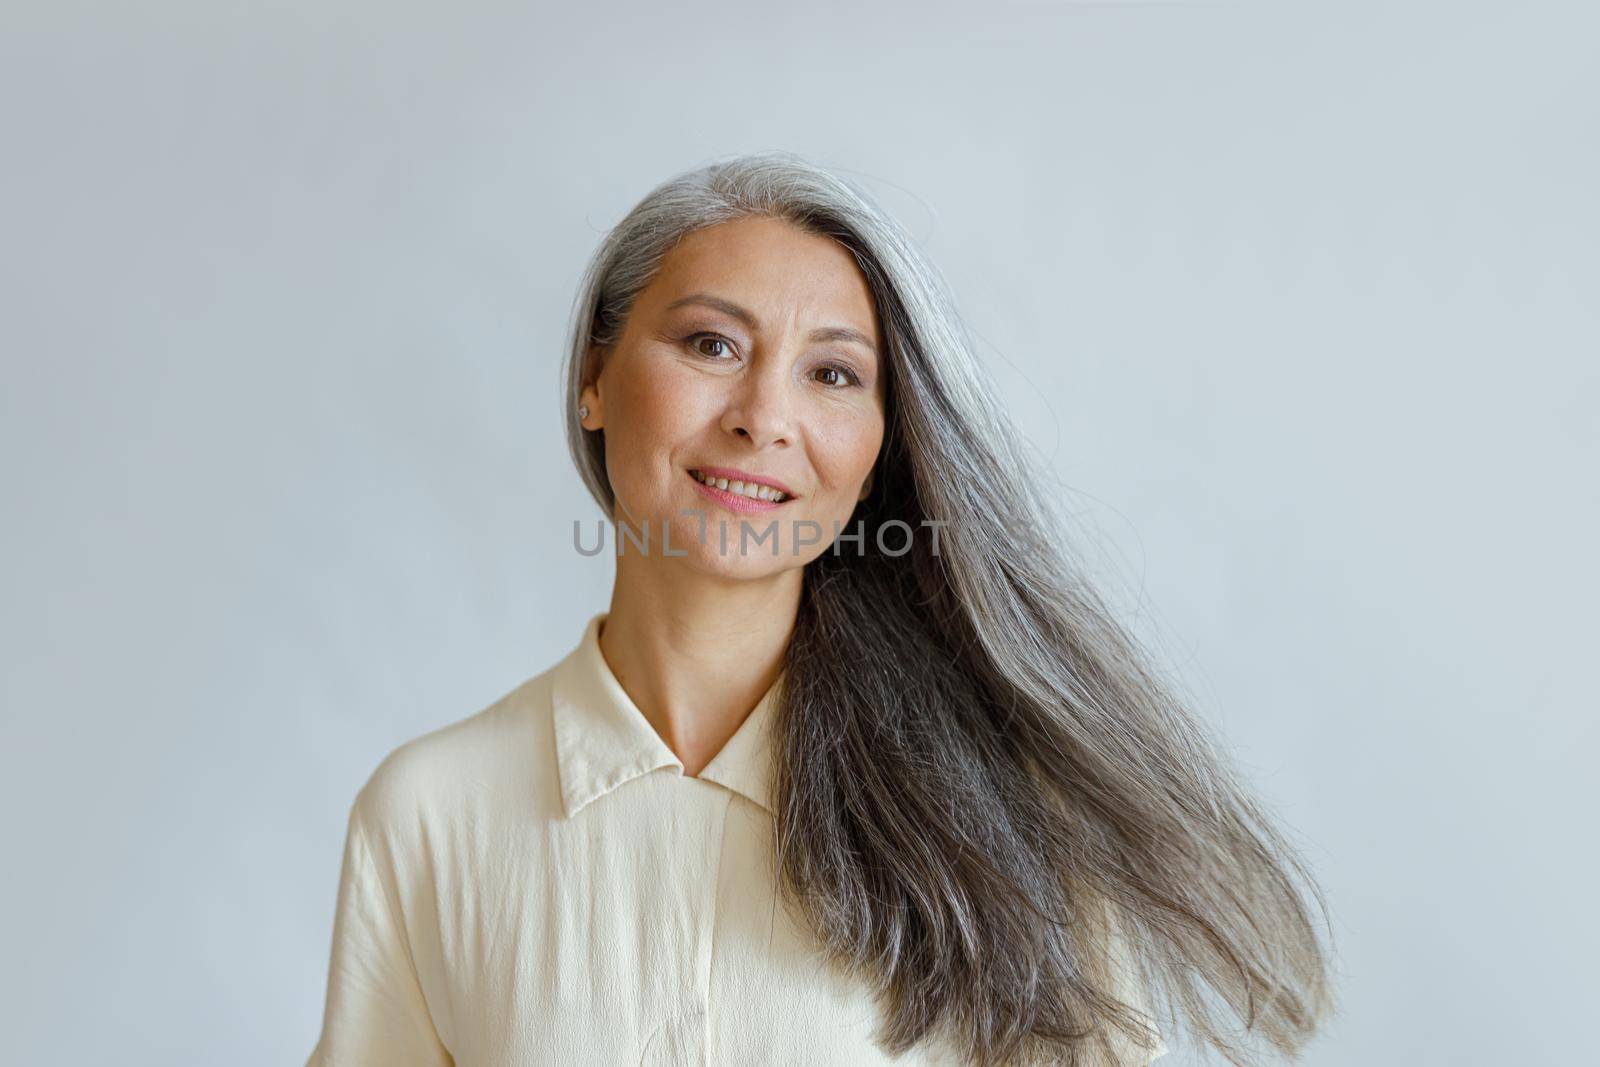 Smiling middle aged Asian woman with flowing grey hair stands on light background in studio. Mature beauty lifestyle